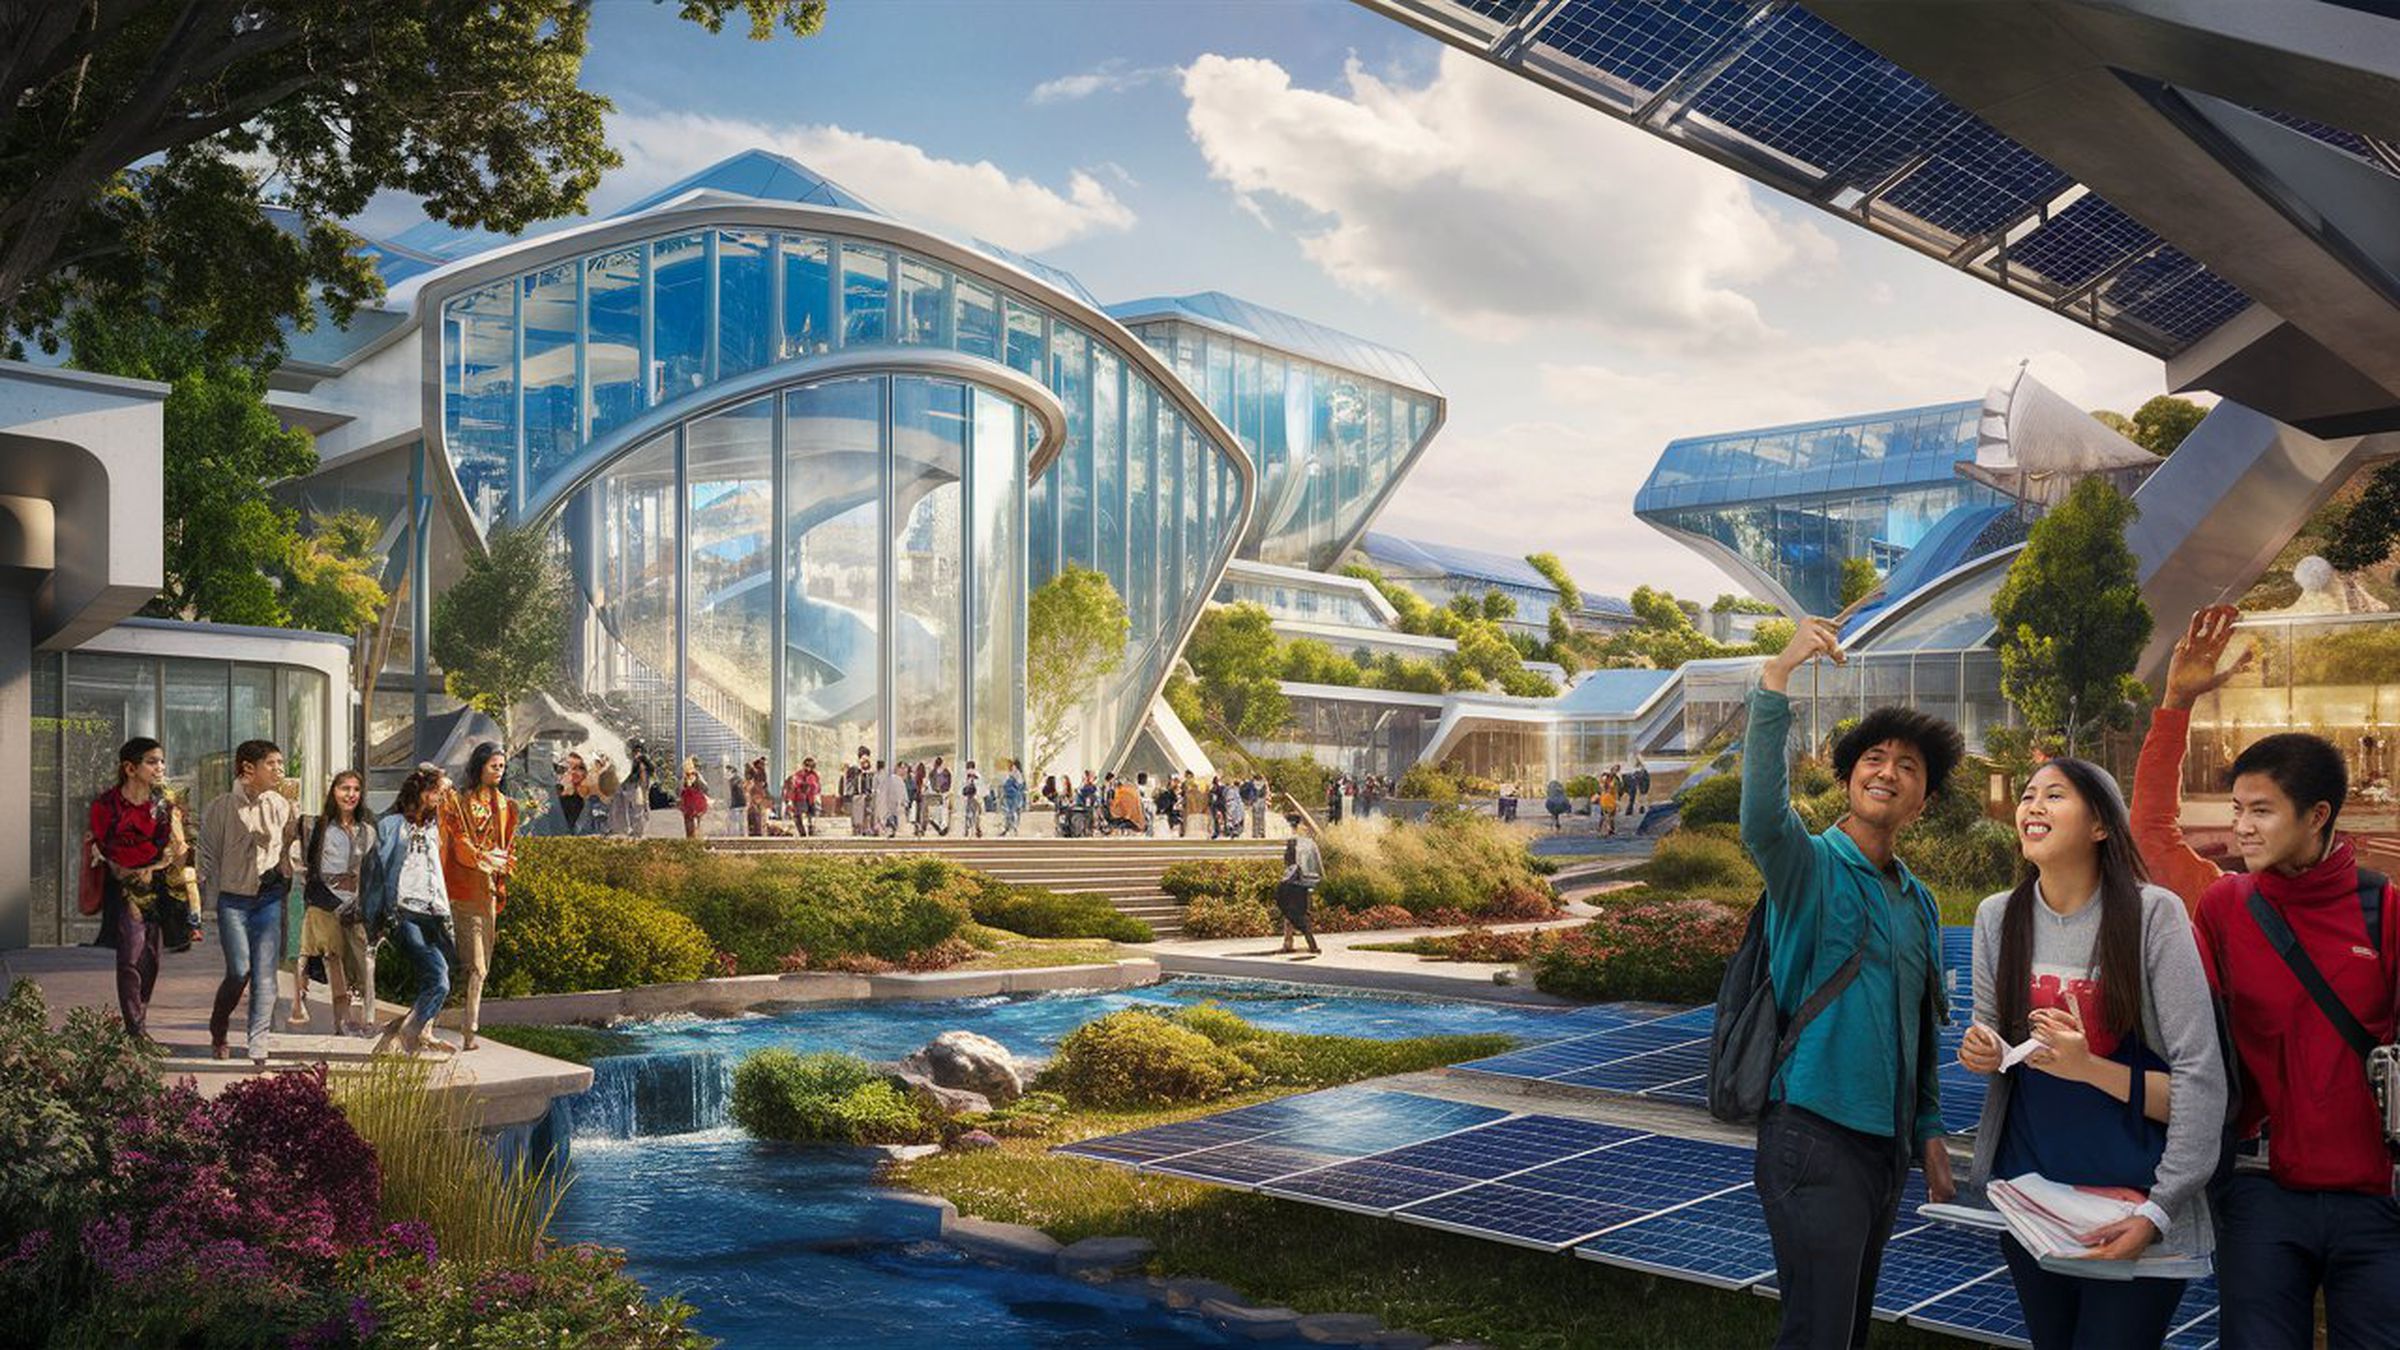 An illustration of a futuristic school with people walking around it.